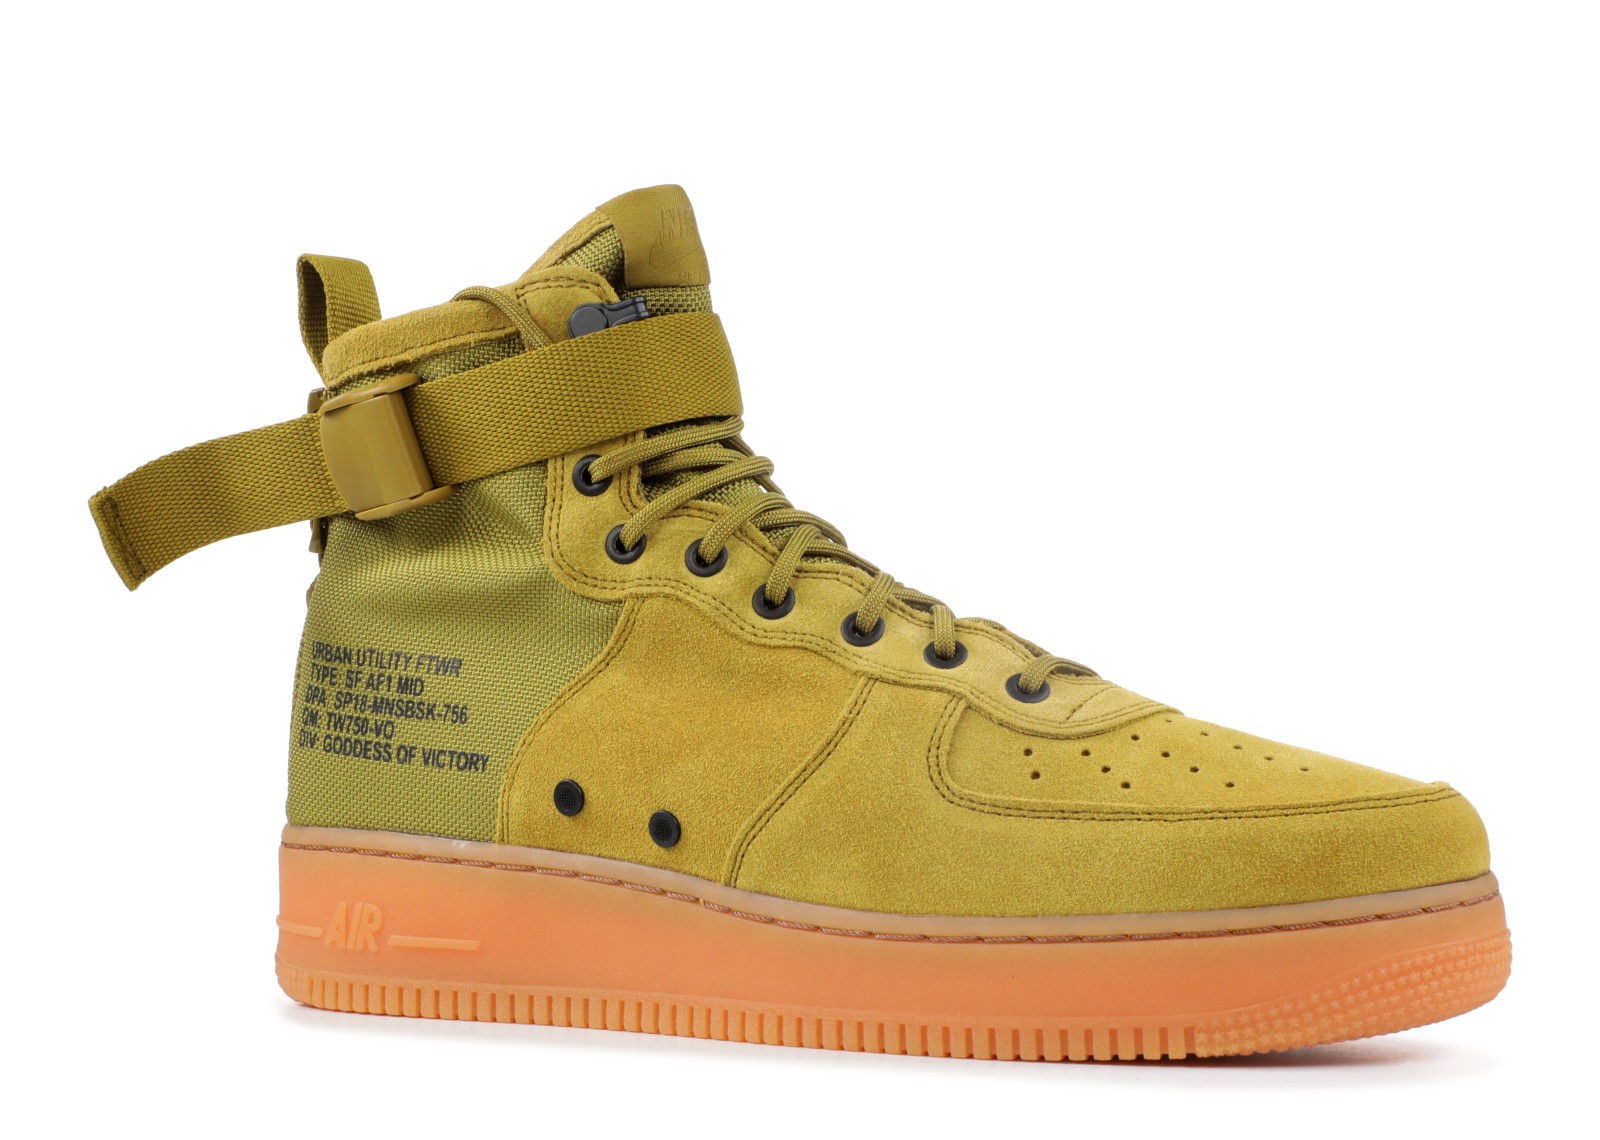 Nike Air Force 1 Sf Af1 Mid Desert Moss 917753-301 - Air Force 1 Mid ...